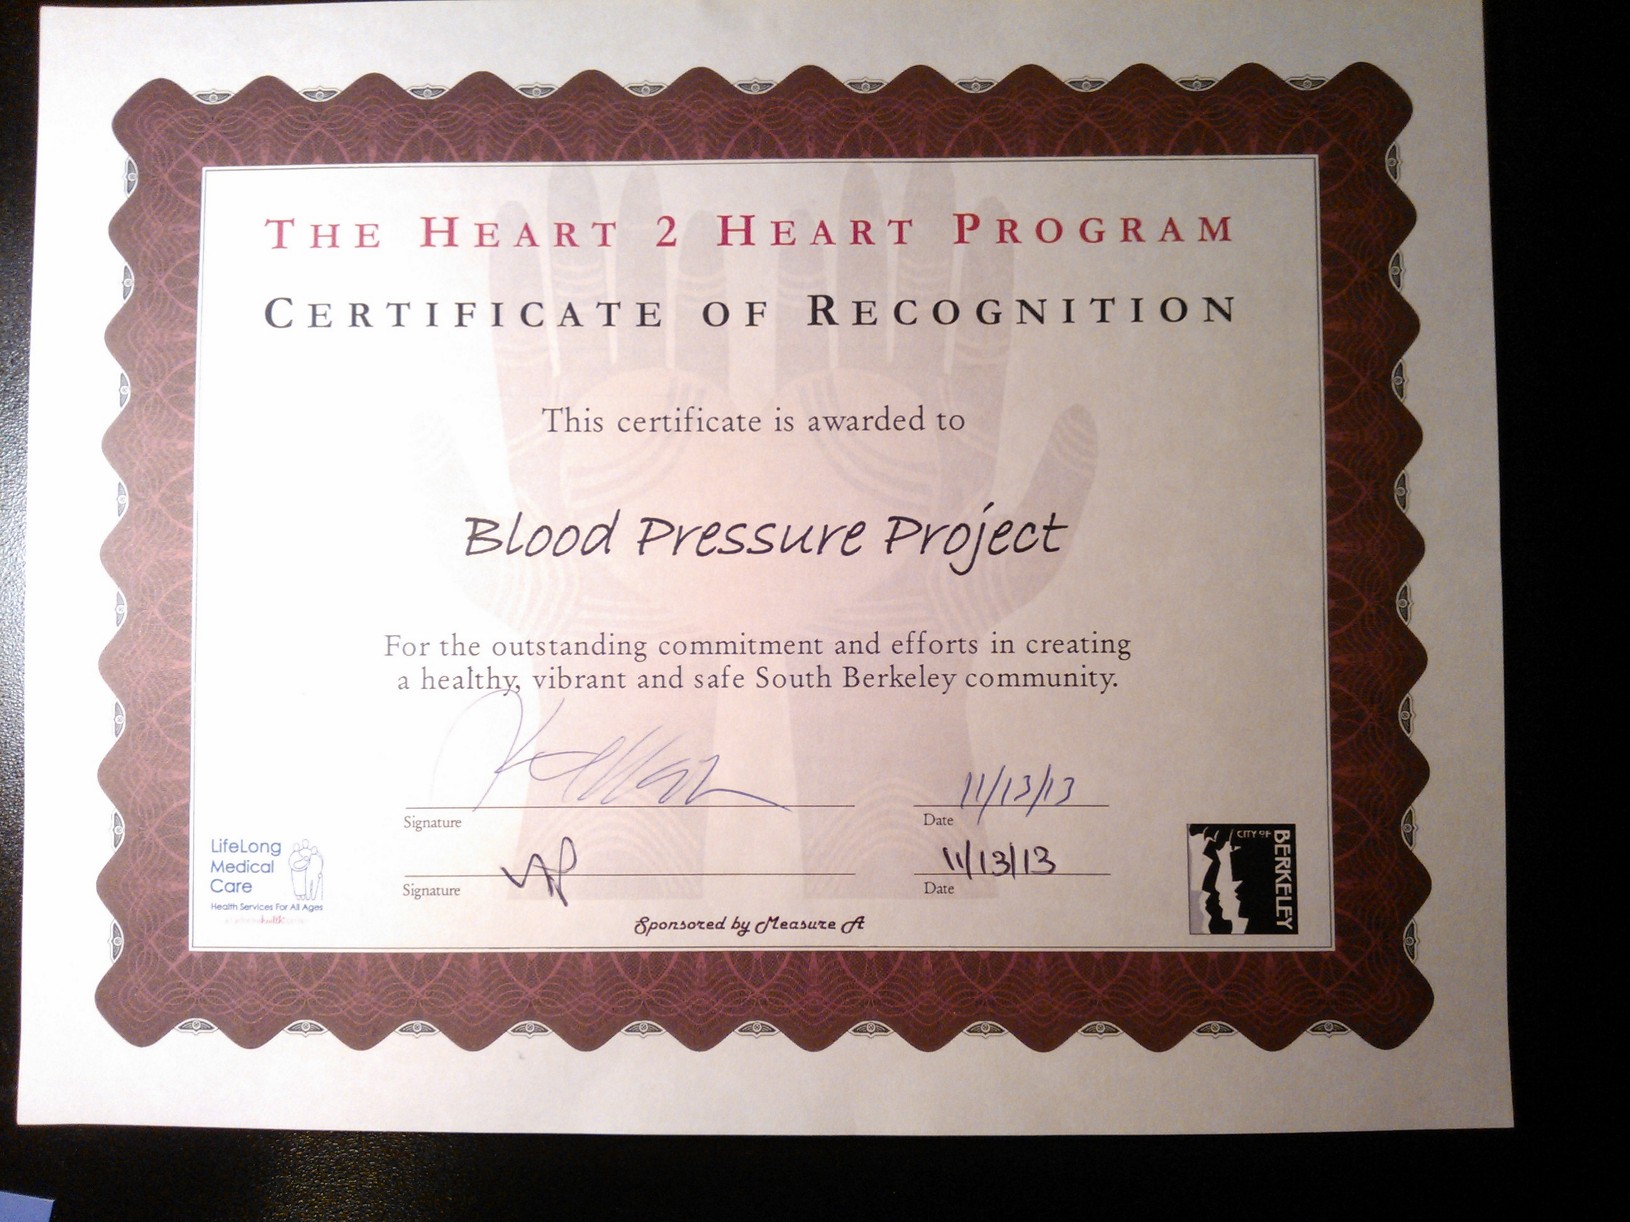 From the City of Berkeley's Heart 2 Heart Program: "For outstanding commitment and efforts in creating a healthy, vibrant, and safe South Berkeley community." 